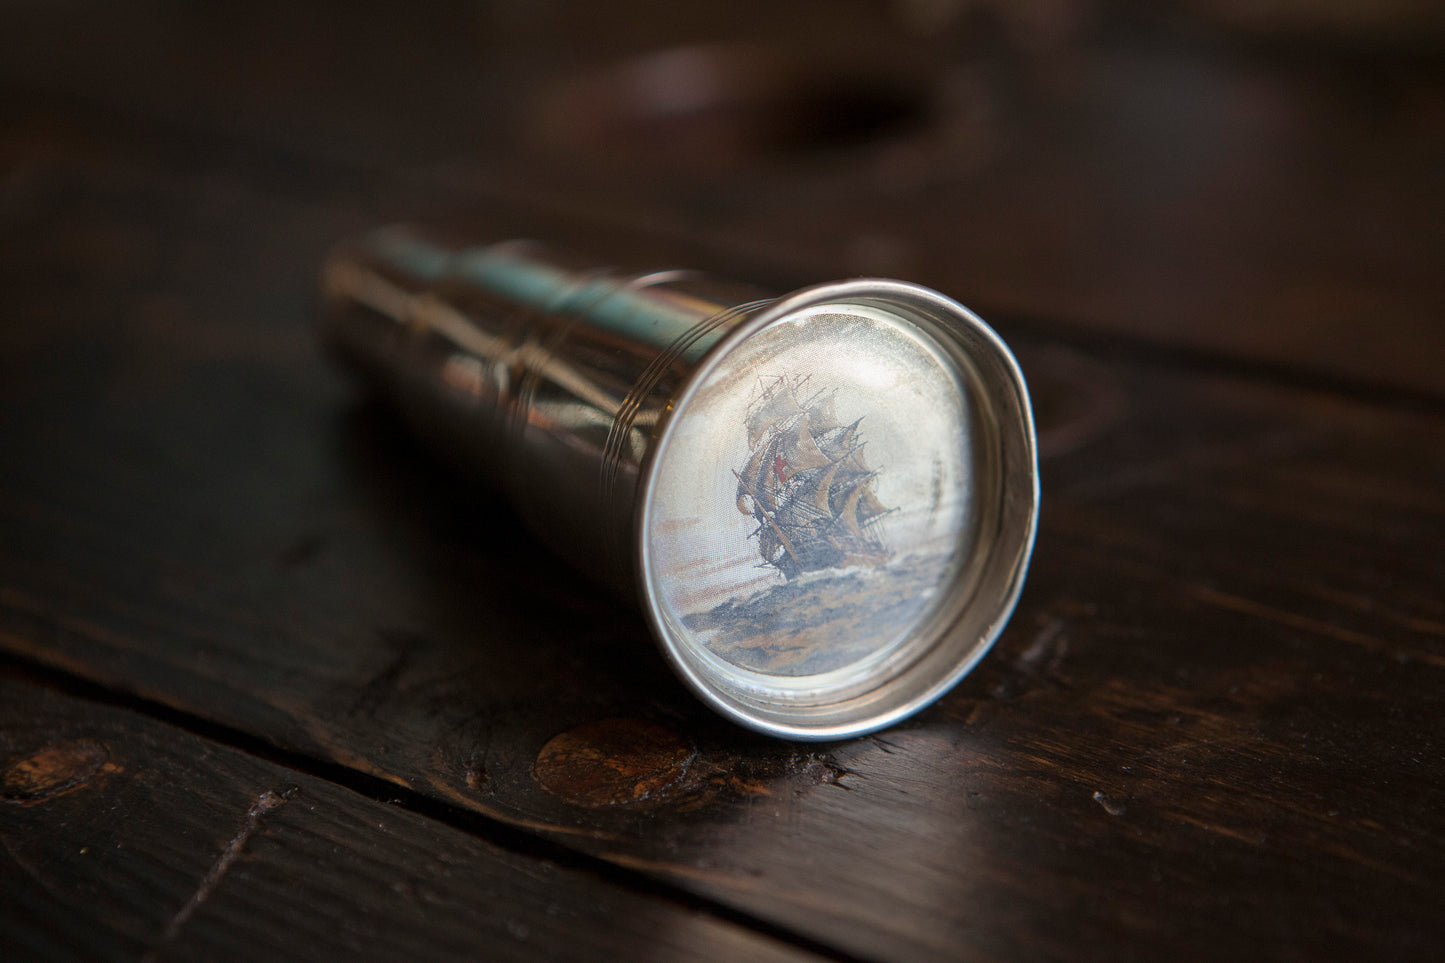 Vintage Pewter Telescope Flask. Actually extends and has a picture of a boat on the "glass"!